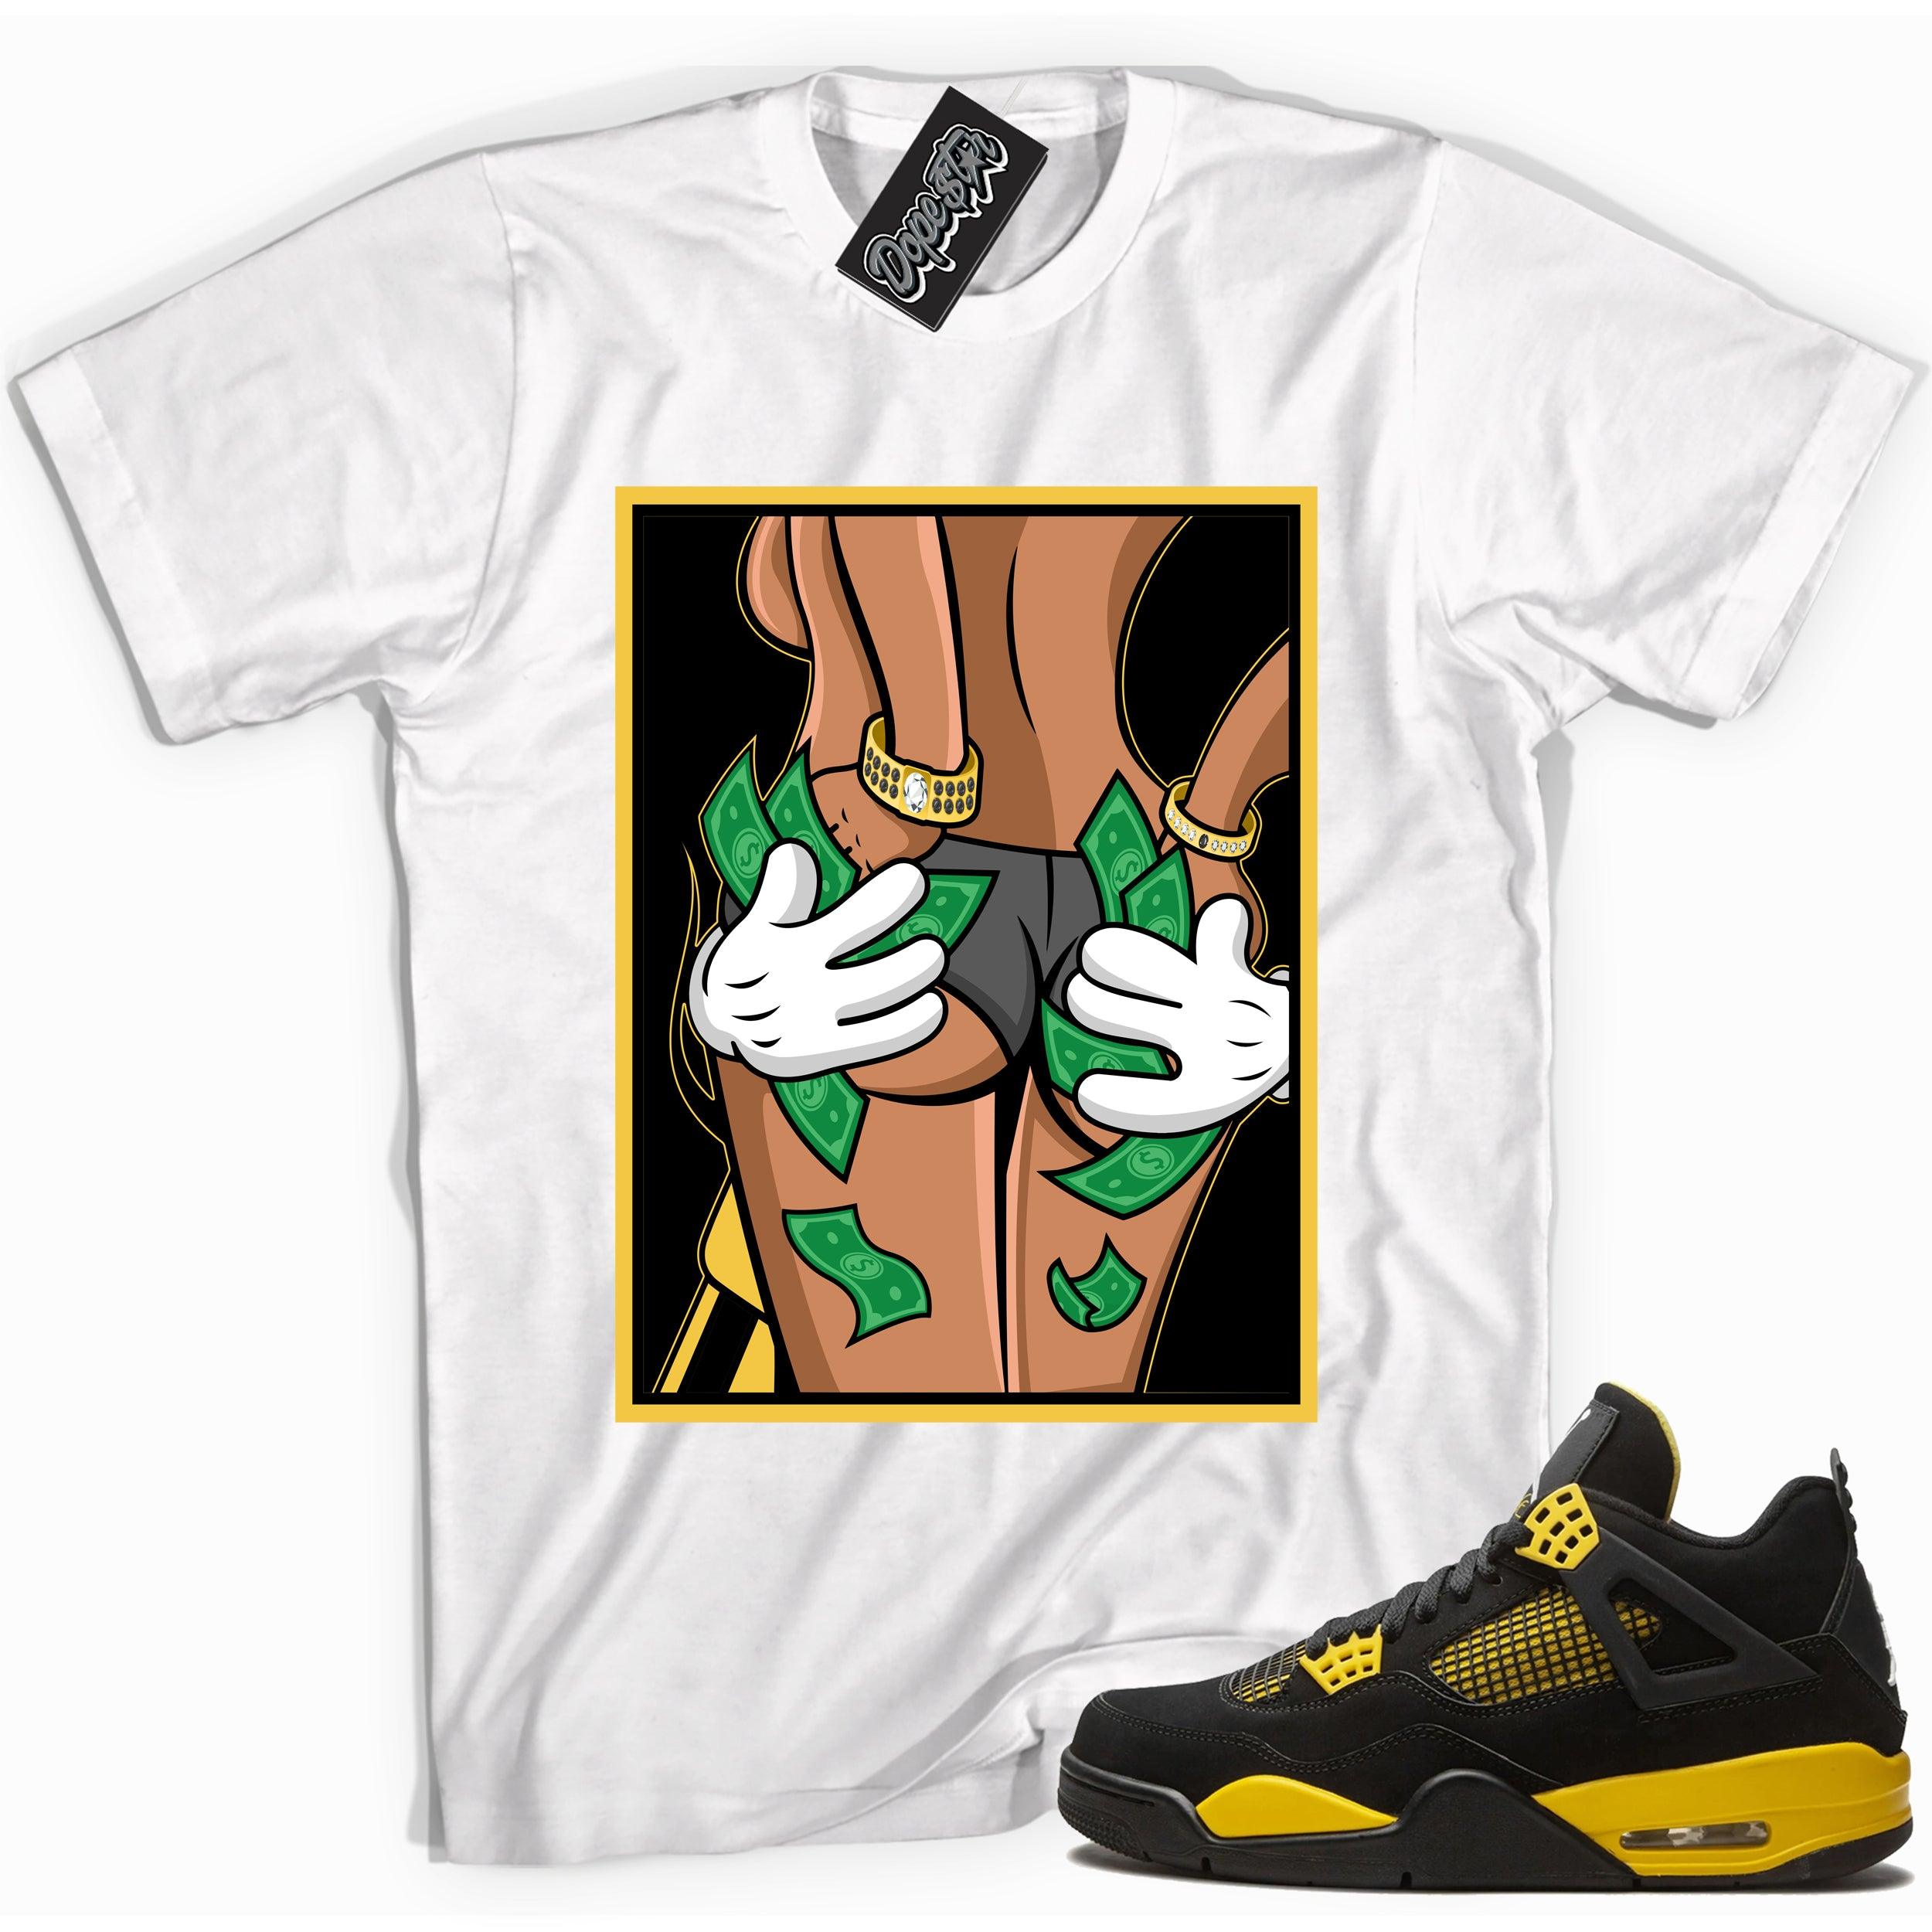 Cool white graphic tee with 'got my hands full money hands' print, that perfectly matches Air Jordan 4 Thunder sneakers